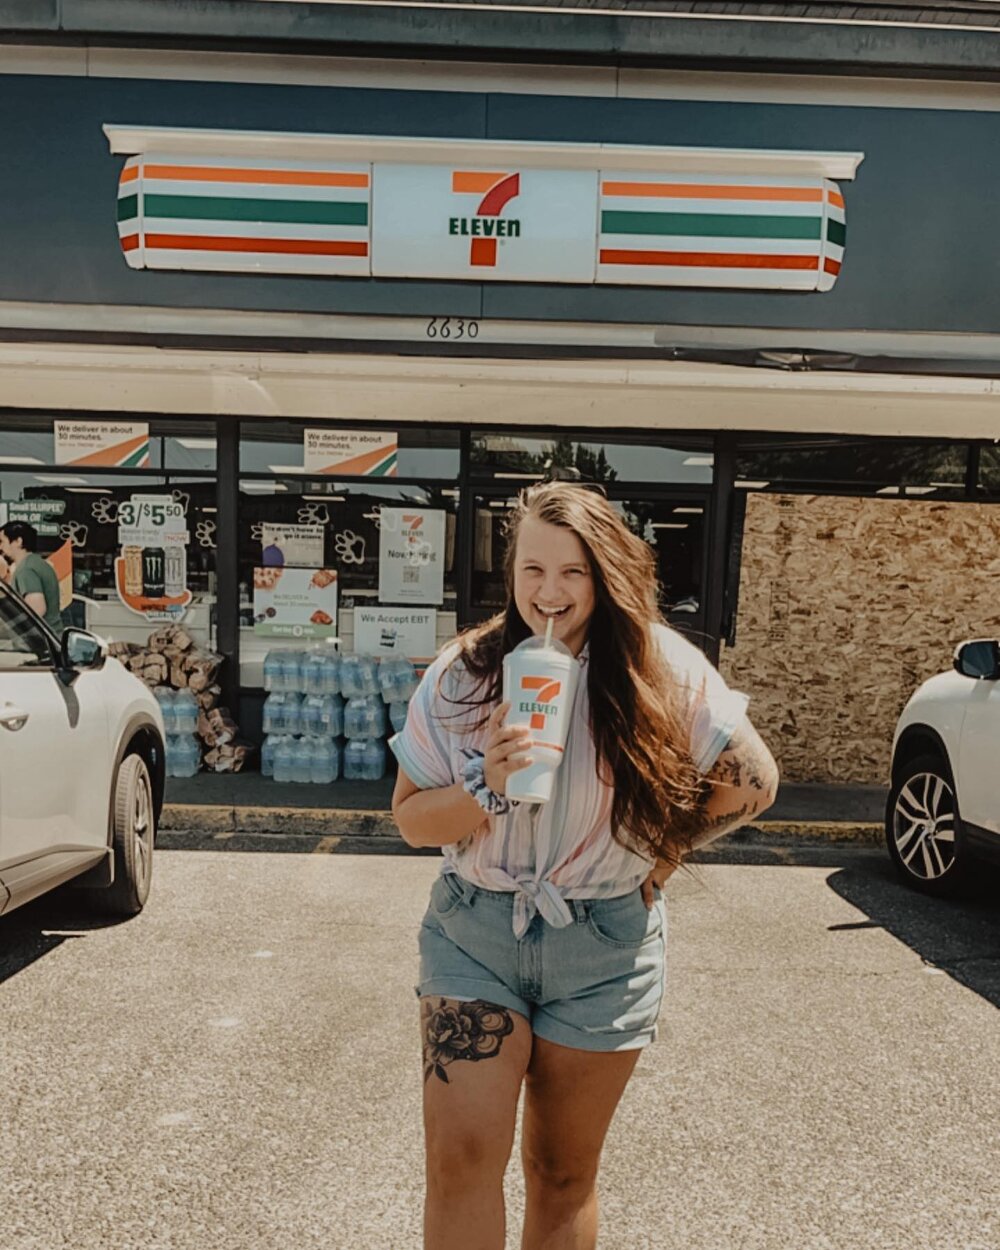 ✨is it even 7/11 if you didn&rsquo;t get a slurpee at 7/11?✨ 
&bull;
&bull;
&bull;
#711 #july11th #seveneleven #slurpeeday #retrovibes #girlswithtattoos #exploreoregon #portland #7eleven